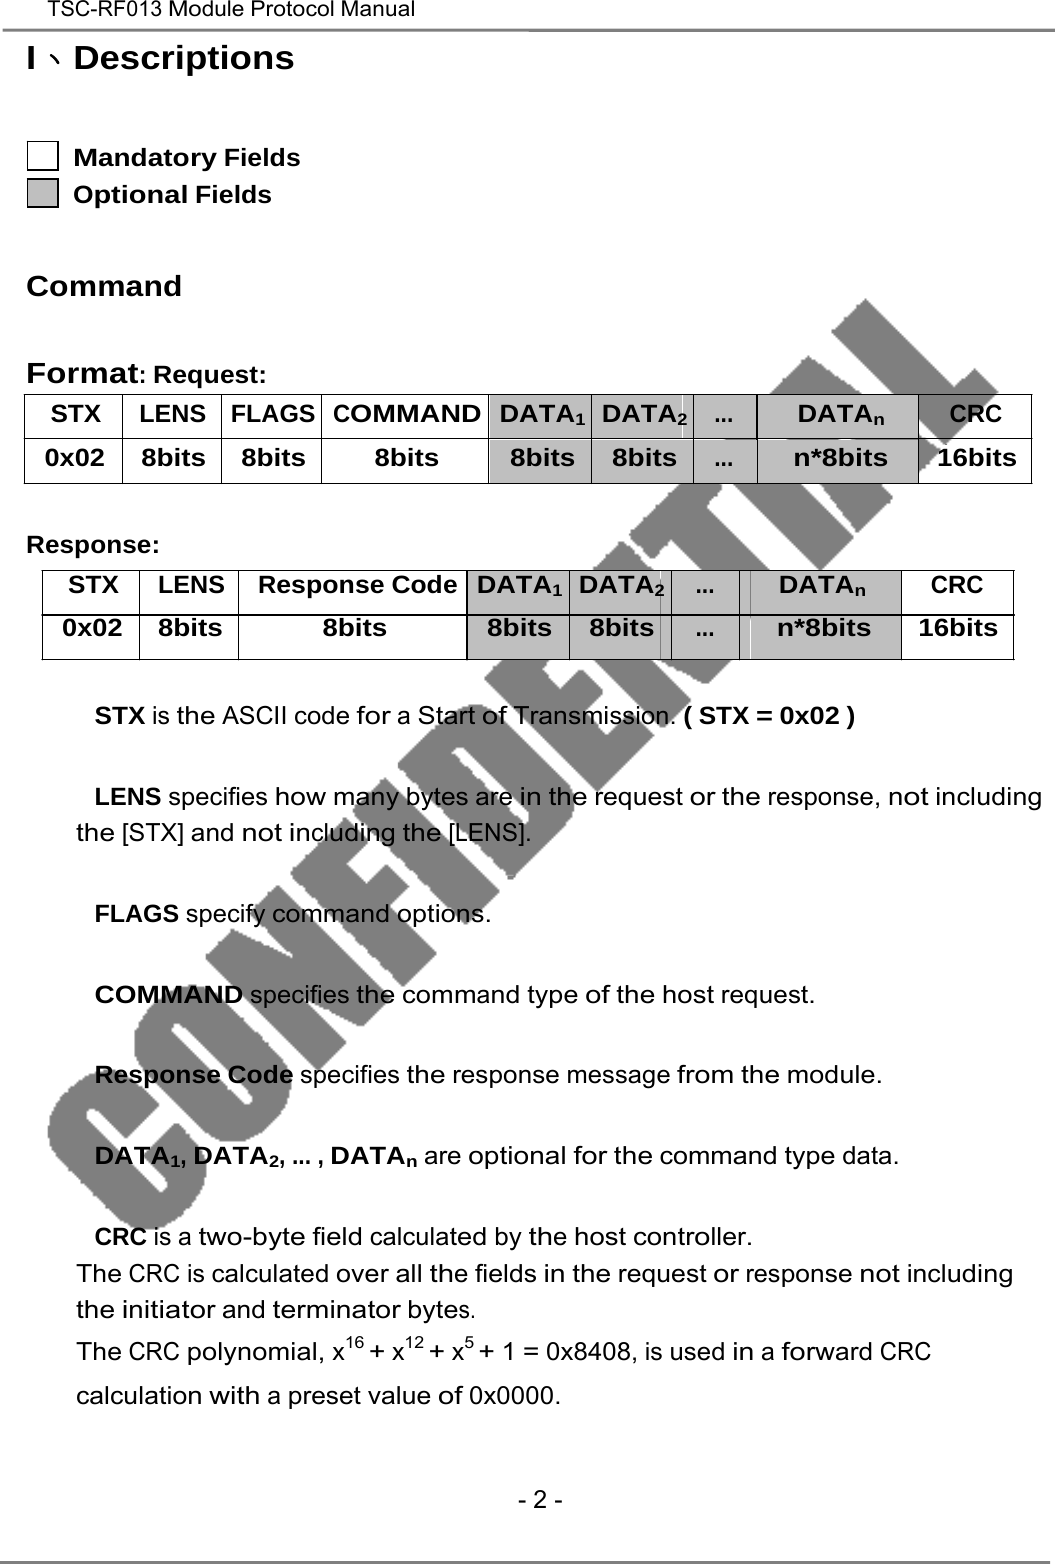   TSC-RF013 Module Protocol Manual  I、Descriptions    Mandatory Fields Optional Fields Command Format: Request: STX LENS FLAGS COMMAND DATA1 DATA2 ... DATAn CRC 0x02 8bits 8bits 8bits 8bits 8bits ... n*8bits 16bits    Response: STX LENS Response Code DATA1 DATA2 ... DATAn CRC 0x02 8bits 8bits 8bits 8bits ... n*8bits 16bits    　   STX is the ASCII code for a Start of Transmission. ( STX = 0x02 )   　   LENS specifies how many bytes are in the request or the response, not including the [STX] and not including the [LENS].   　   FLAGS specify command options.   　   COMMAND specifies the command type of the host request.   　   Response Code specifies the response message from the module.   　   DATA1, DATA2, ... , DATAn are optional for the command type data.   　   CRC is a two-byte field calculated by the host controller. The CRC is calculated over all the fields in the request or response not including the initiator and terminator bytes. The CRC polynomial, x16 + x12 + x5 + 1 = 0x8408, is used in a forward CRC calculation with a preset value of 0x0000.     - 2 - 